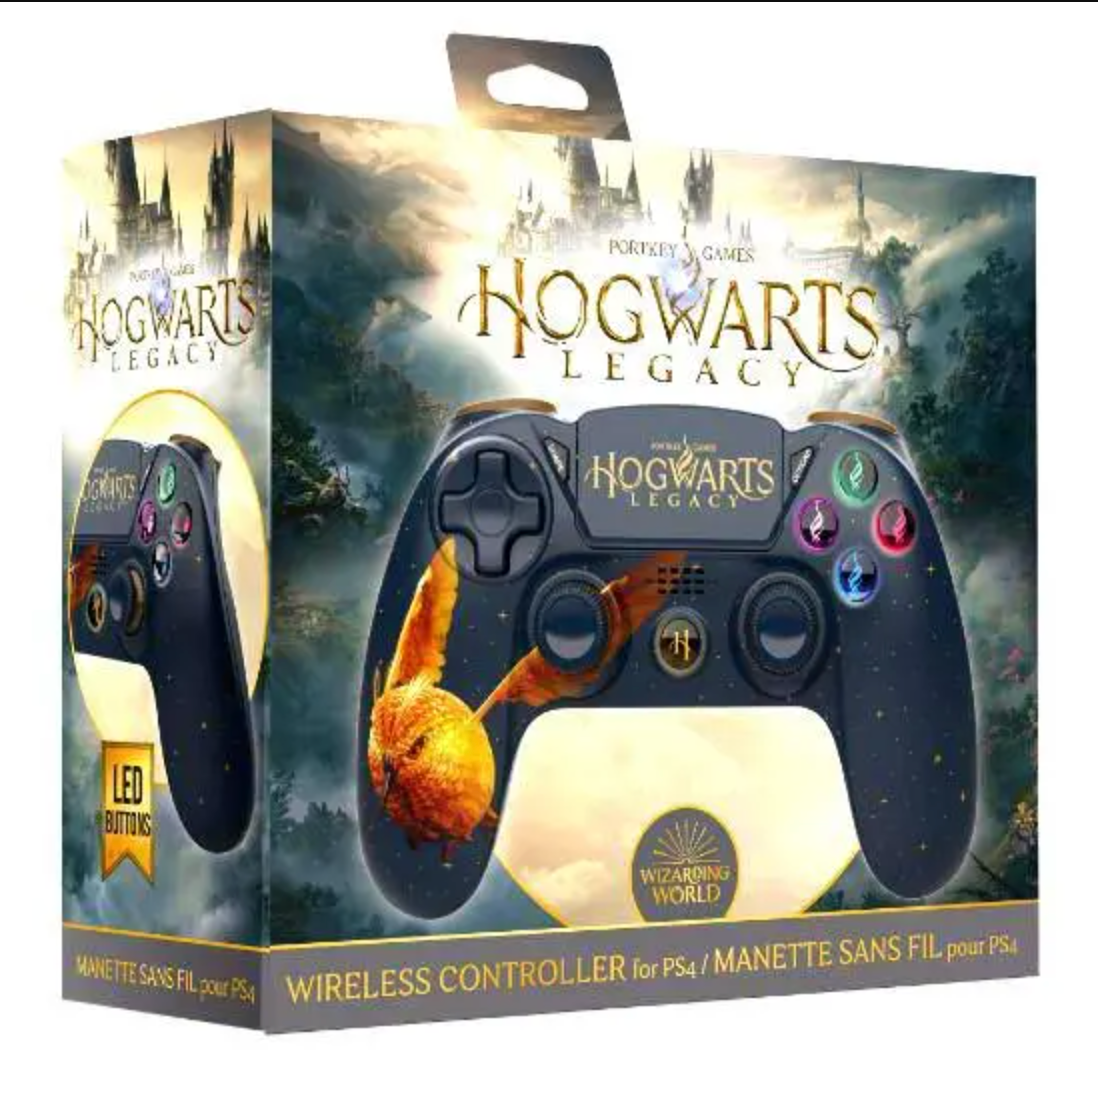 Harry Potter Hogwarts Legacy Wireless Controler (Limited Edition)